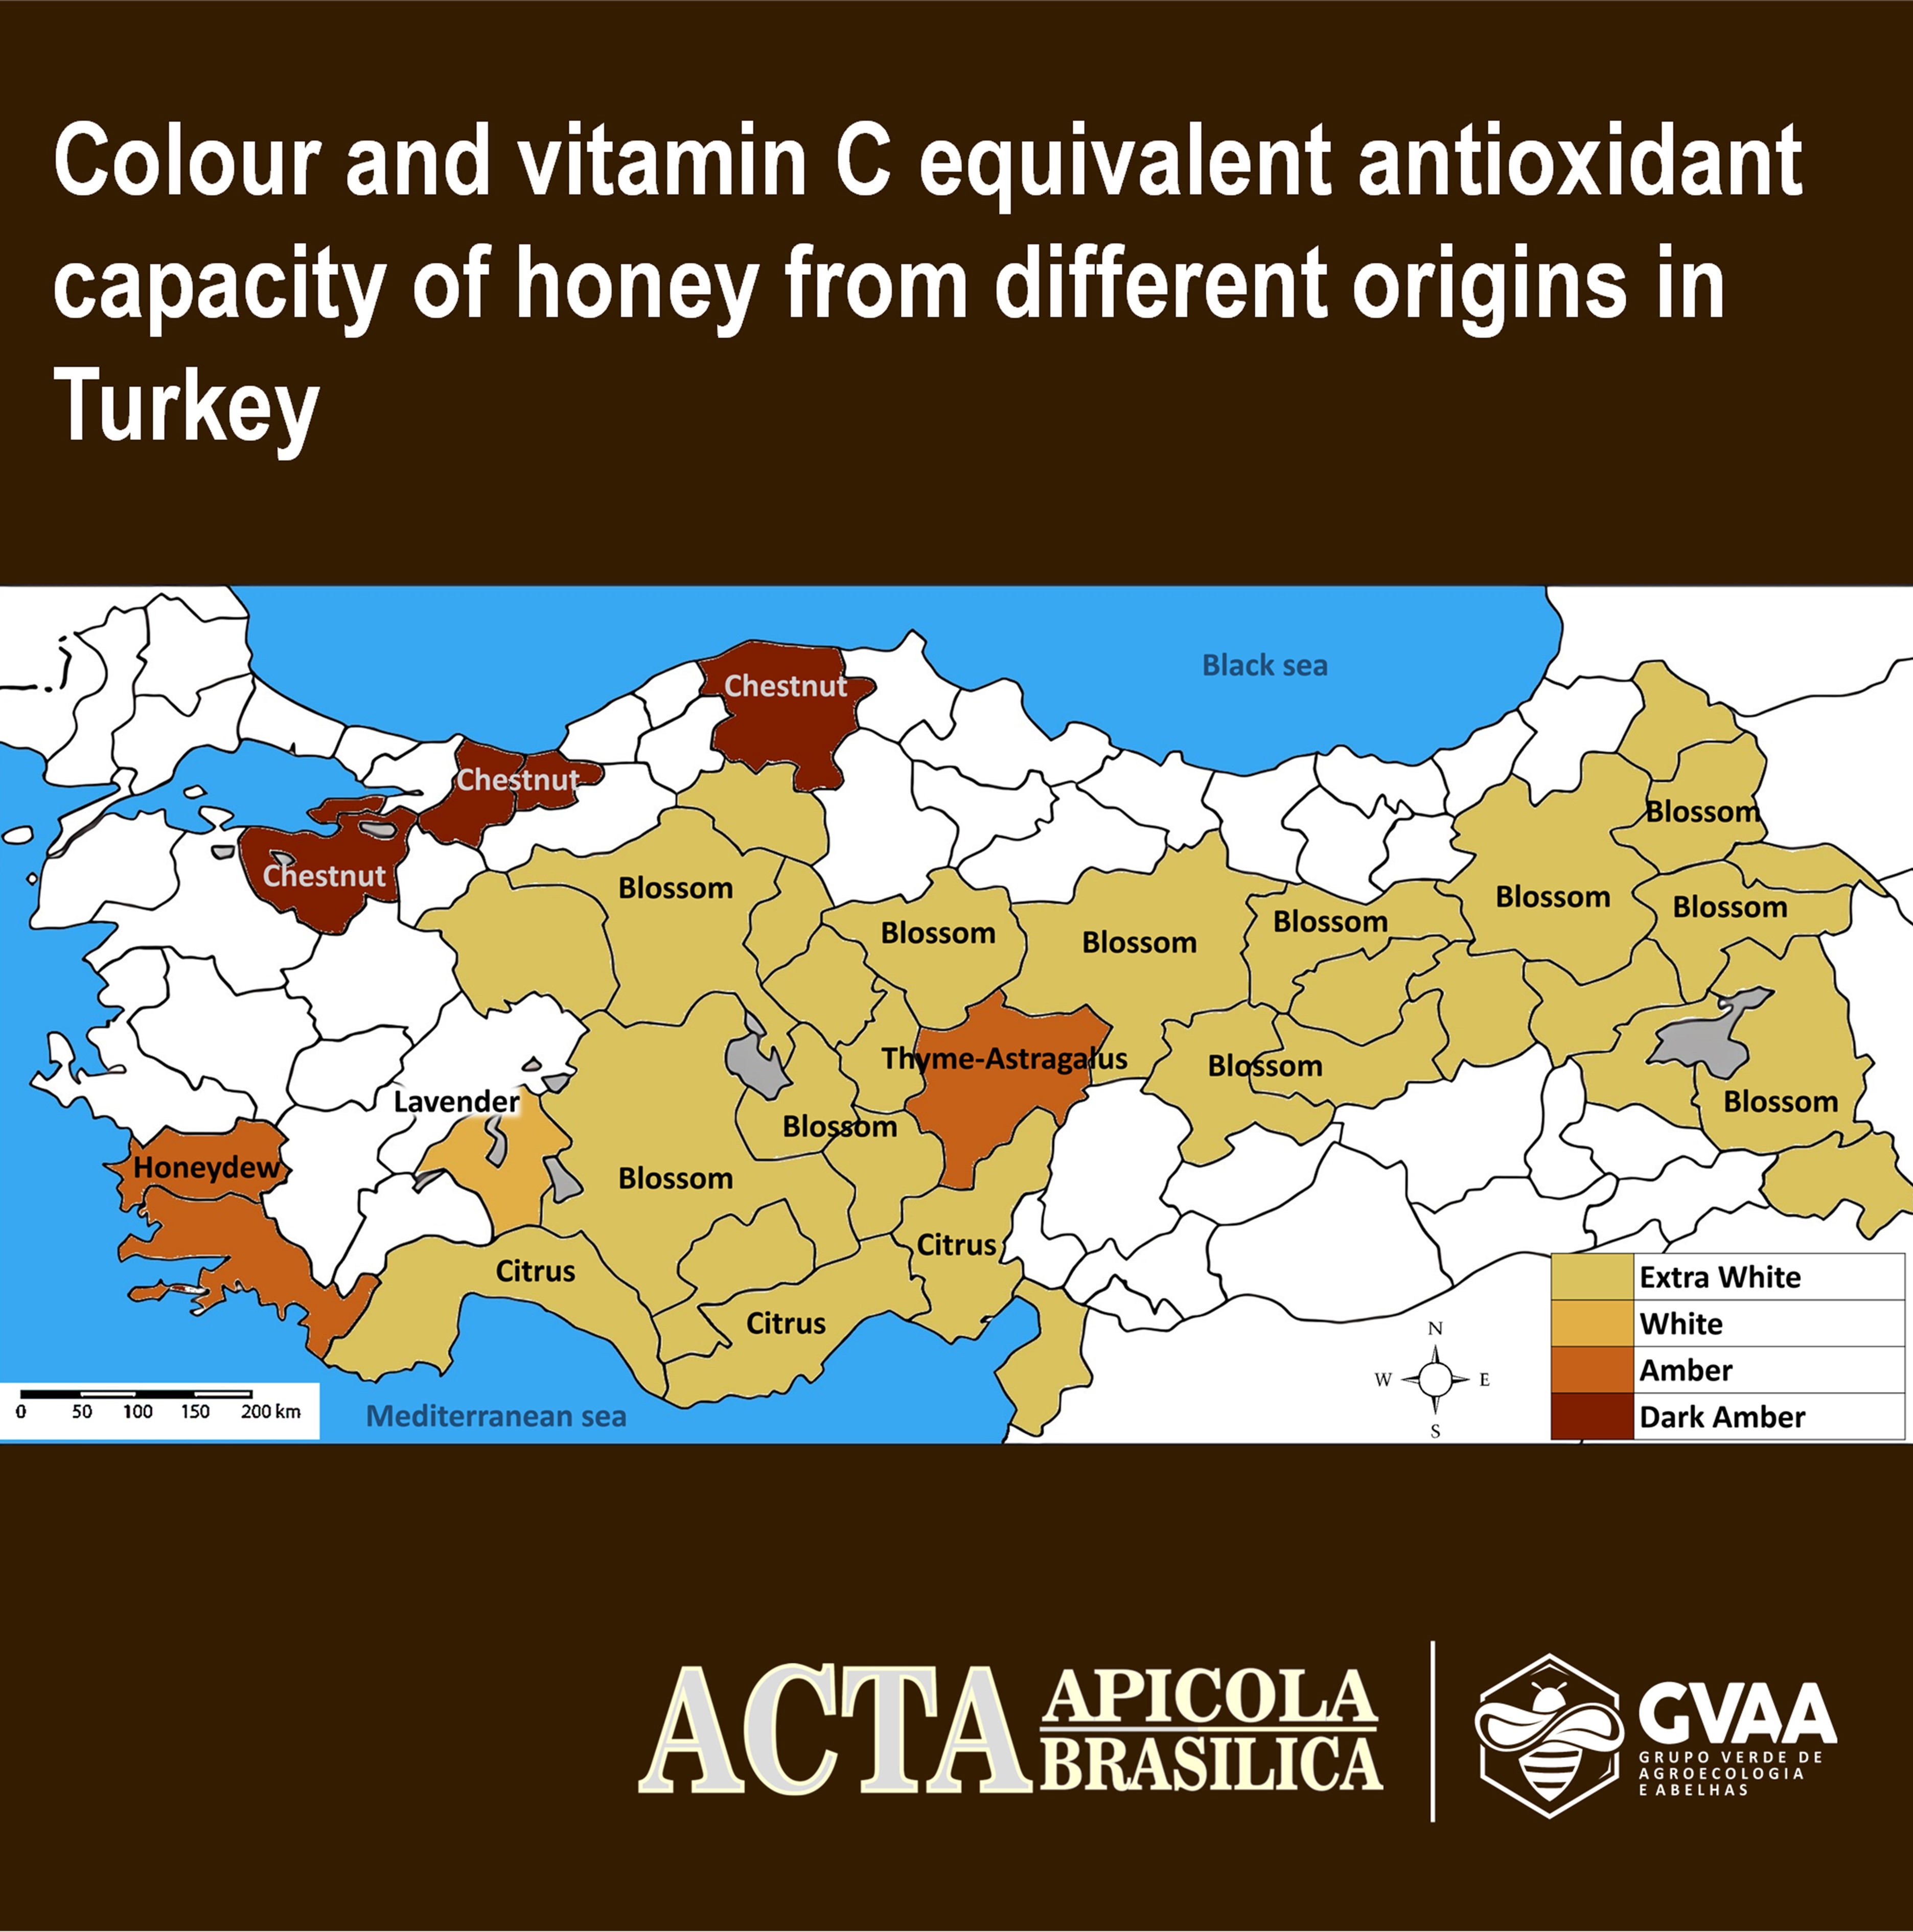 Colour and vitamin C equivalent antioxidant capacity of honey from different origins in Turkey